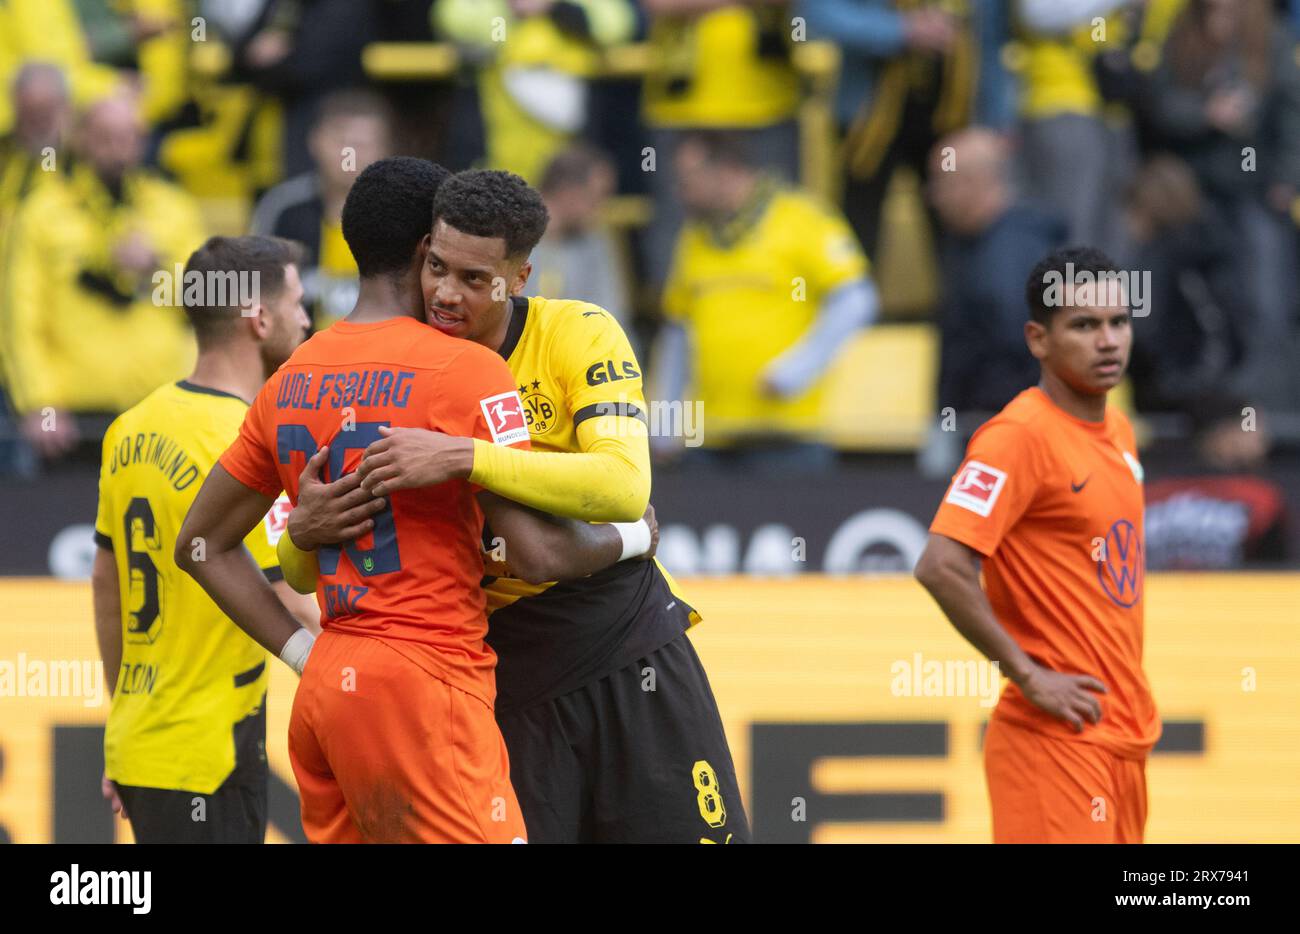 Dortmund, Germany. 23rd Sep, 2023. Soccer: Bundesliga, Borussia Dortmund - VfL Wolfsburg, Matchday 5, Signal Iduna Park. Dortmund's Felix Nmecha (center) and Wolfsburg's Moritz Jenz embrace after the game. Credit: Bernd Thissen/dpa - IMPORTANT NOTE: In accordance with the requirements of the DFL Deutsche Fußball Liga and the DFB Deutscher Fußball-Bund, it is prohibited to use or have used photographs taken in the stadium and/or of the match in the form of sequence pictures and/or video-like photo series./dpa/Alamy Live News Stock Photo